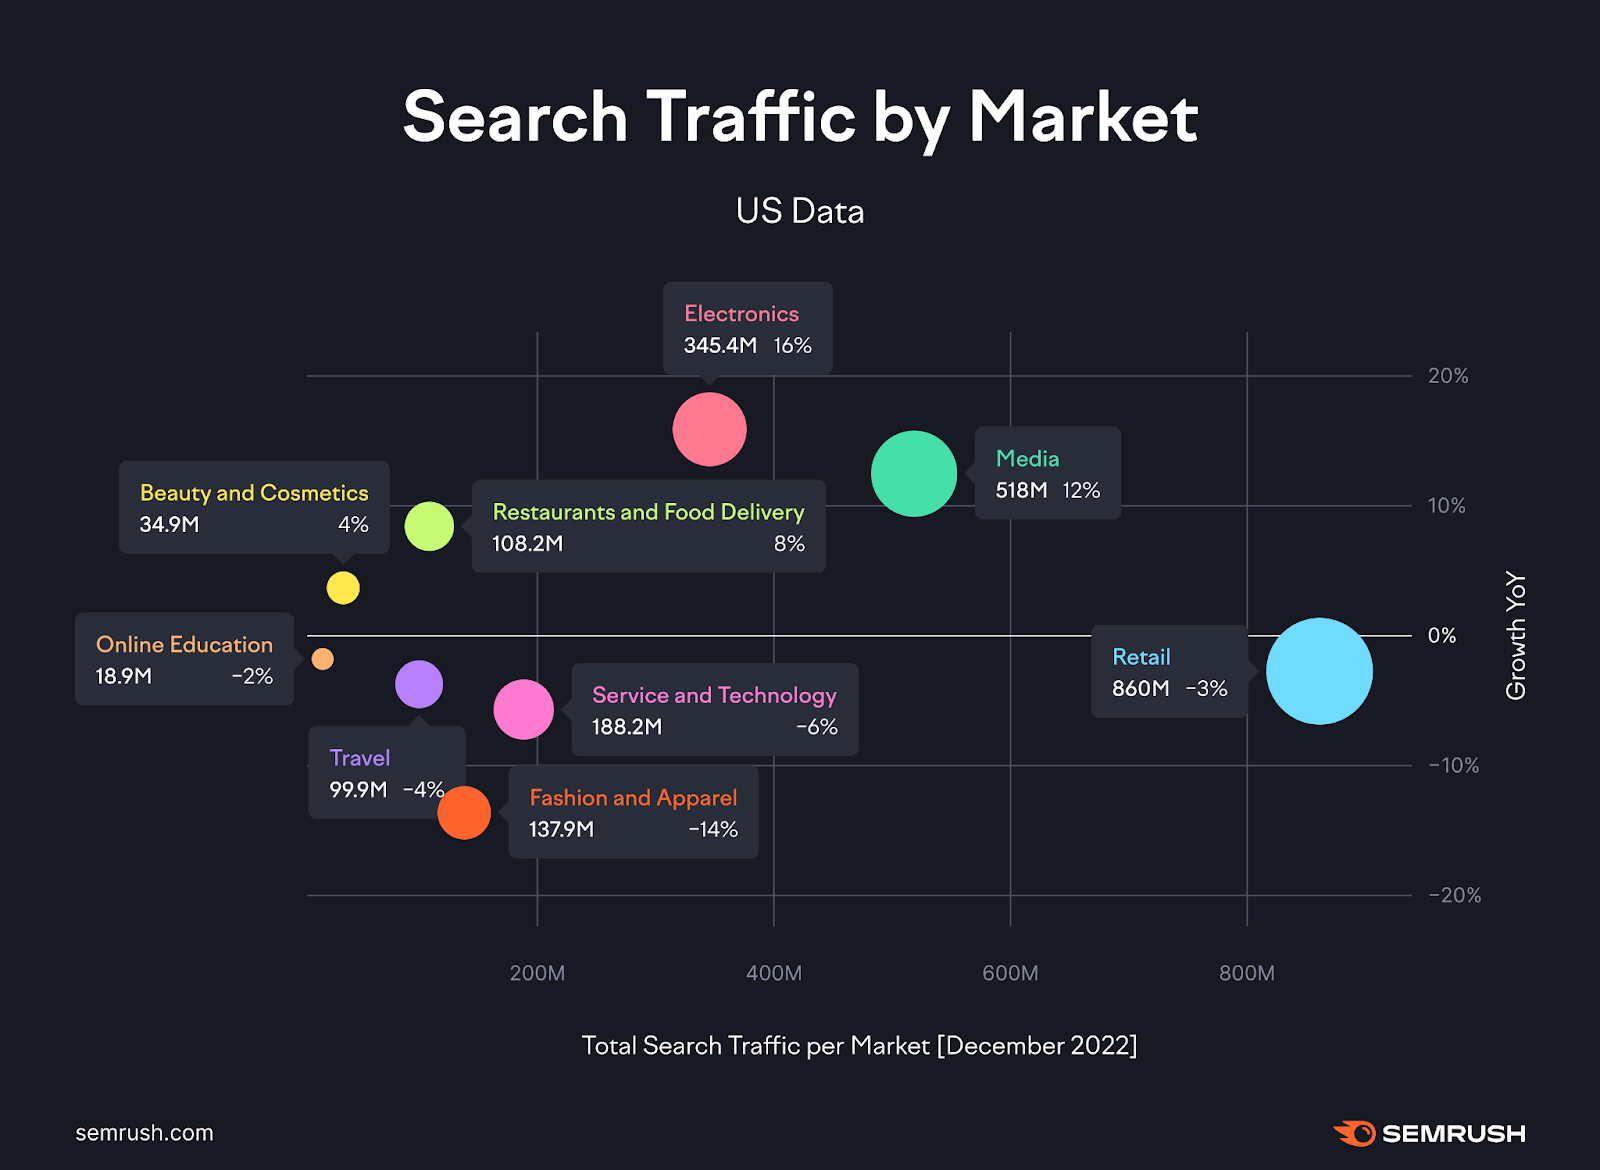 Search traffic by market showing data for the US, from State of Search 2023 report